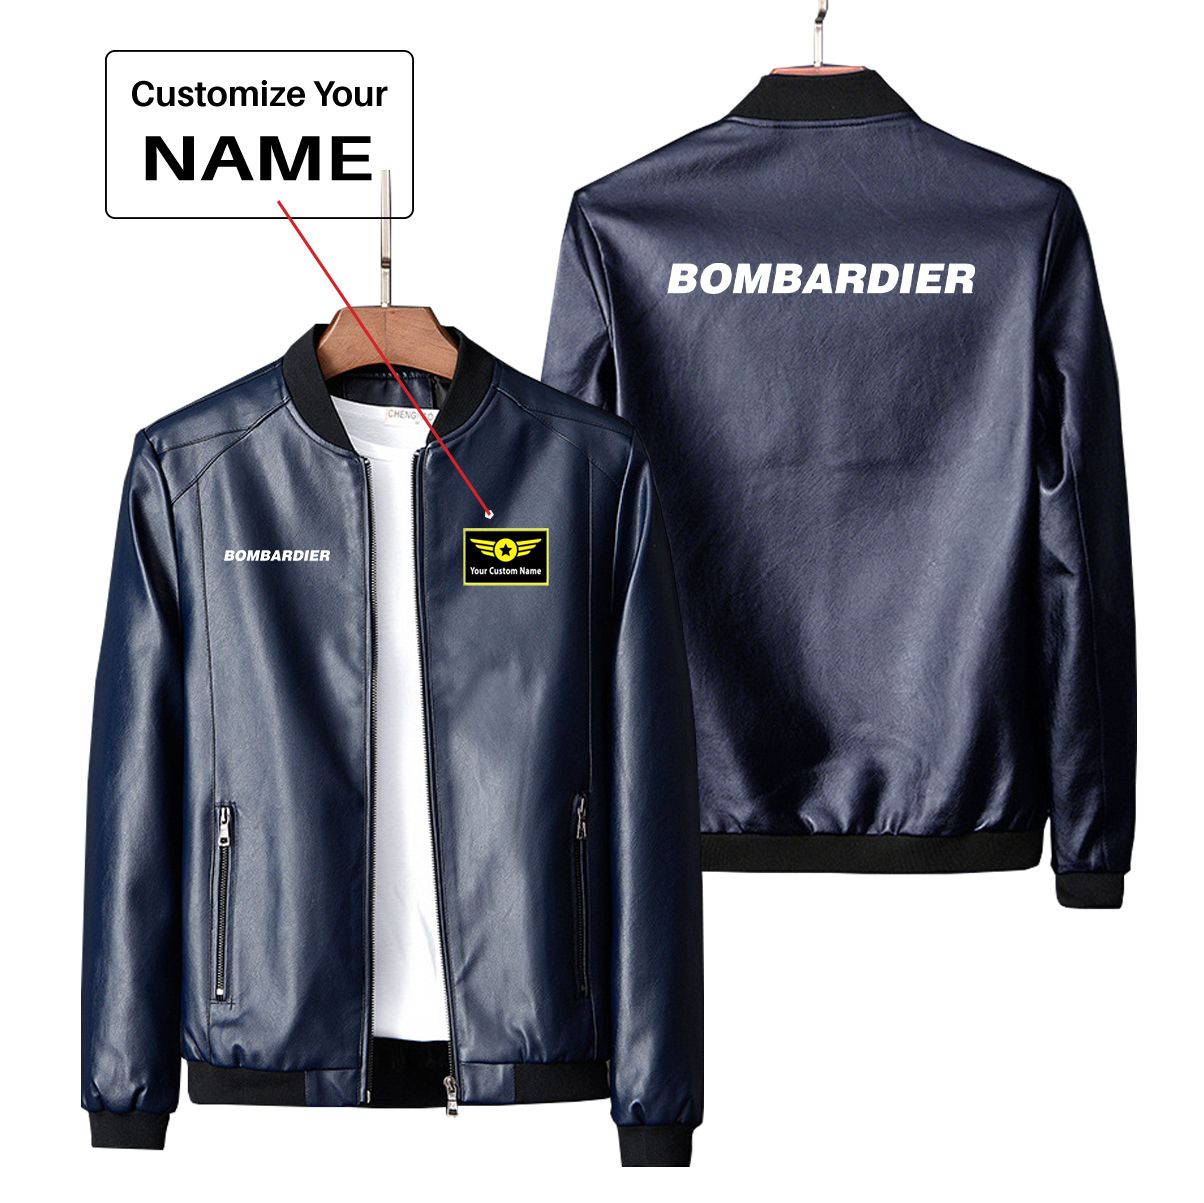 Bombardier & Text Designed PU Leather Jackets